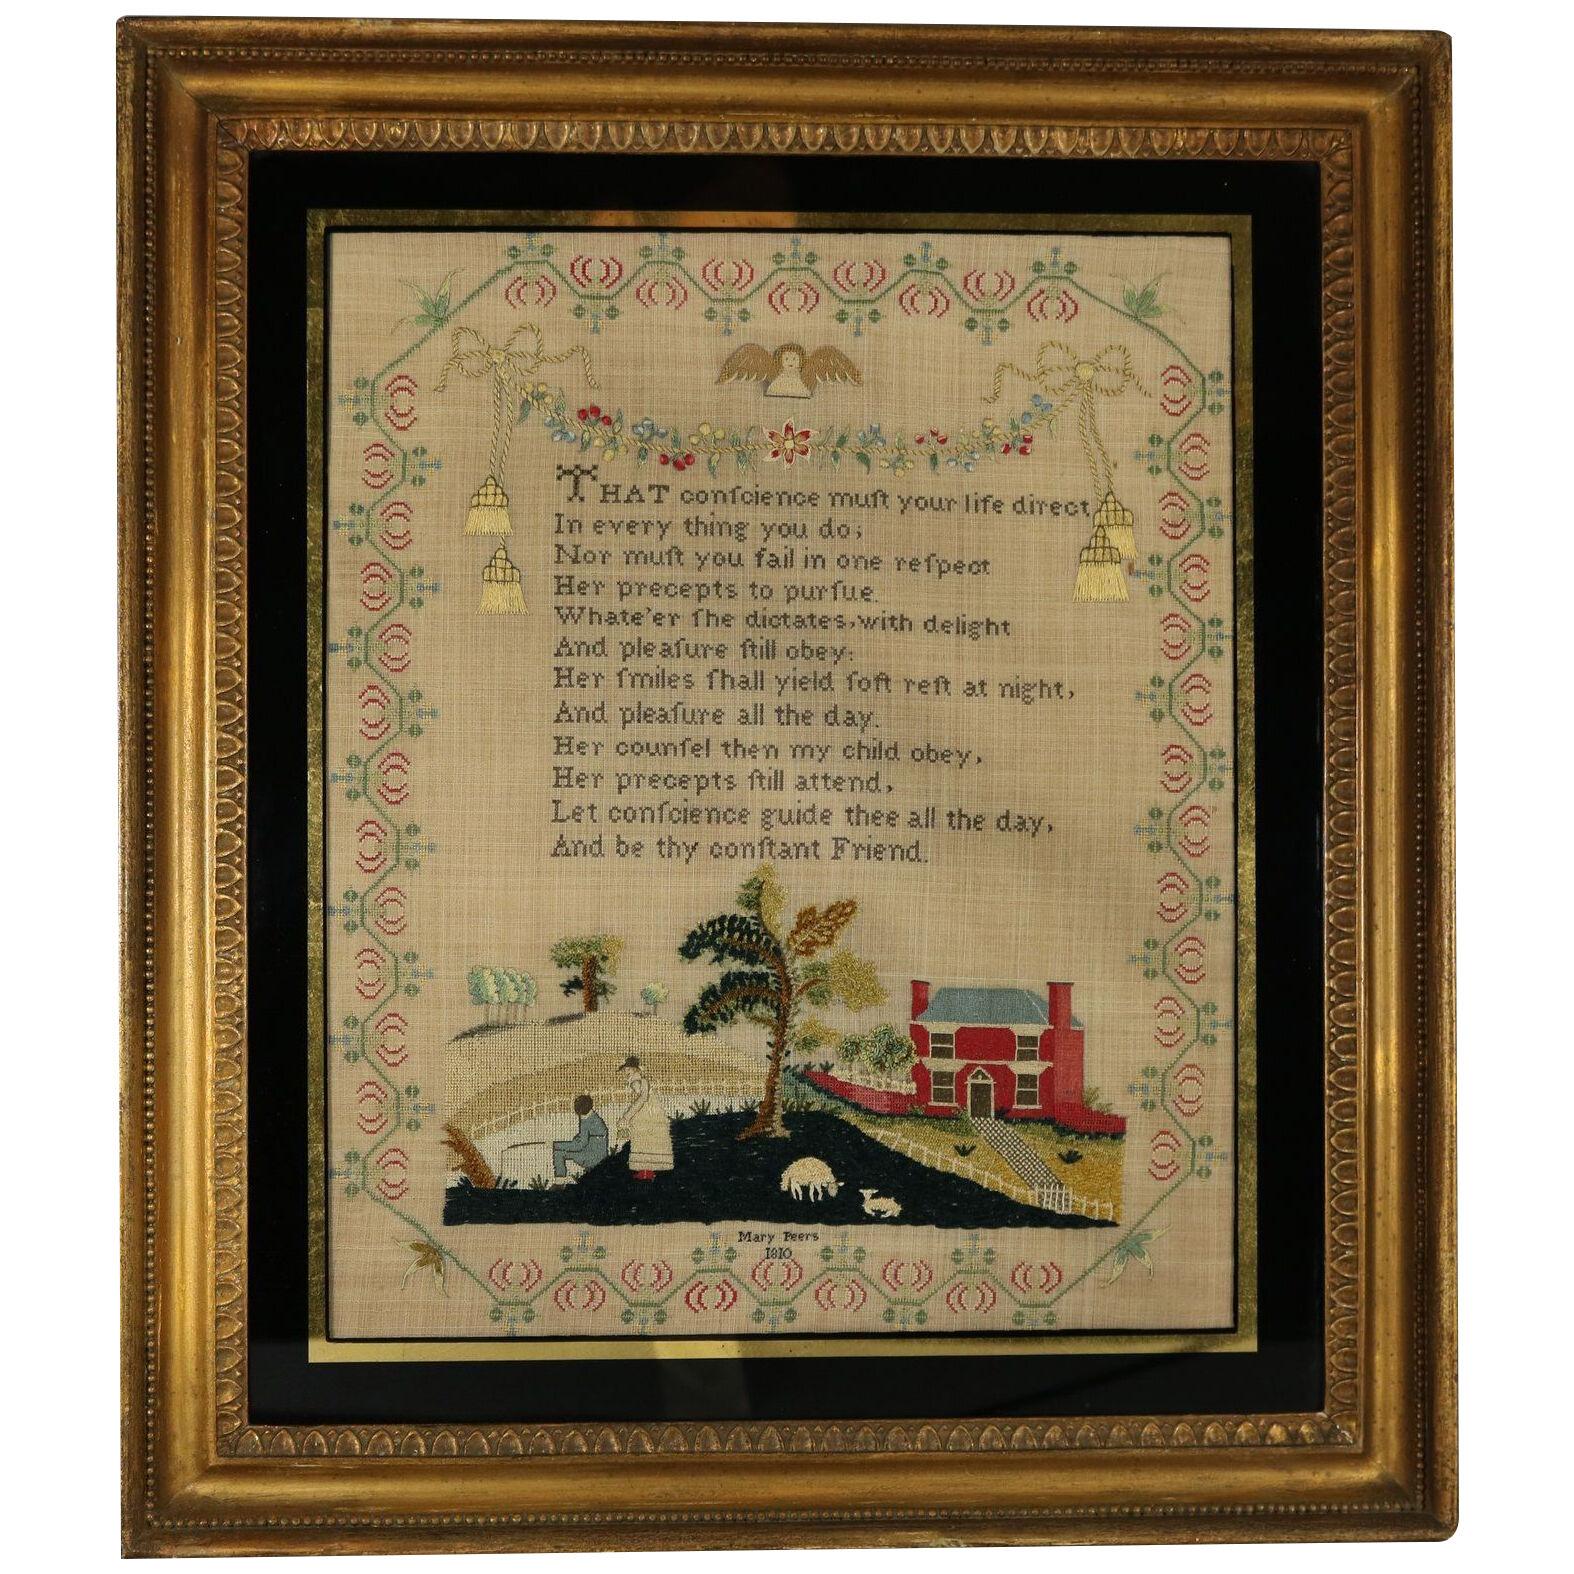 Georgian Sampler, 1810, by Mary Peers with Country Scene